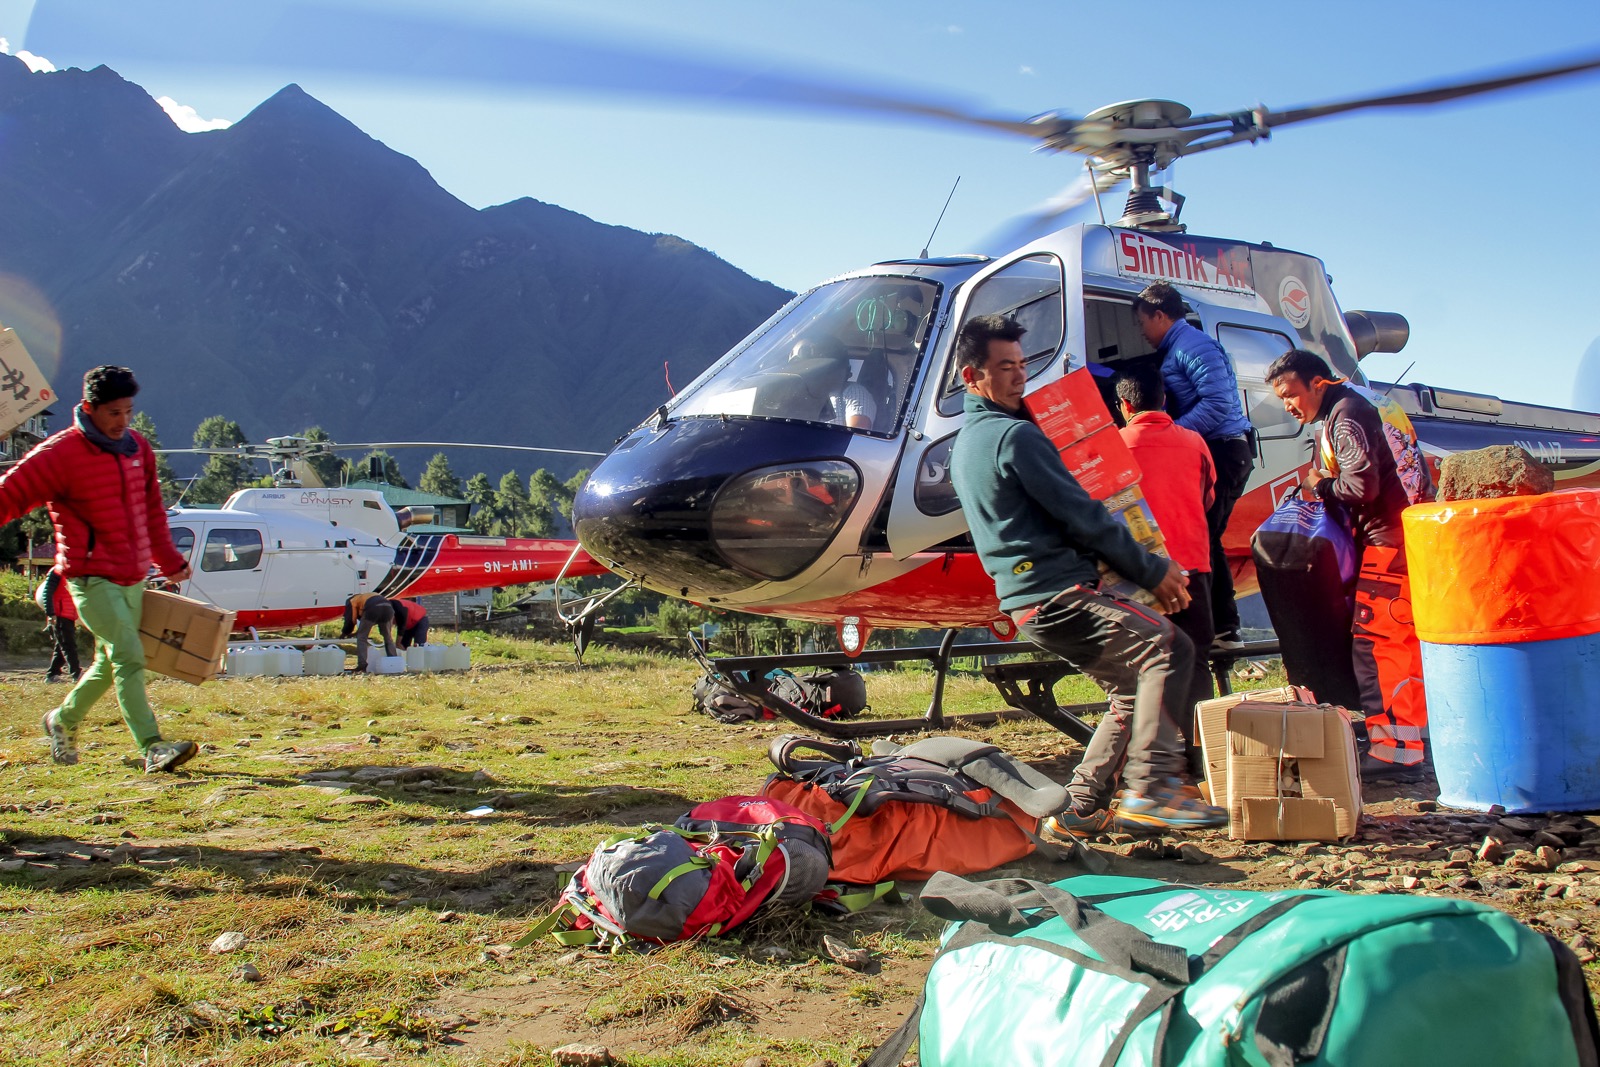 Lukla is the jumping-off point for most Everest climbing and trekking, and when the weather is good, its airport is a hub of activity. With no access by motorized ground vehicles, helicopters play a critical role in transporting cargo as well as people. Elan Head Photo